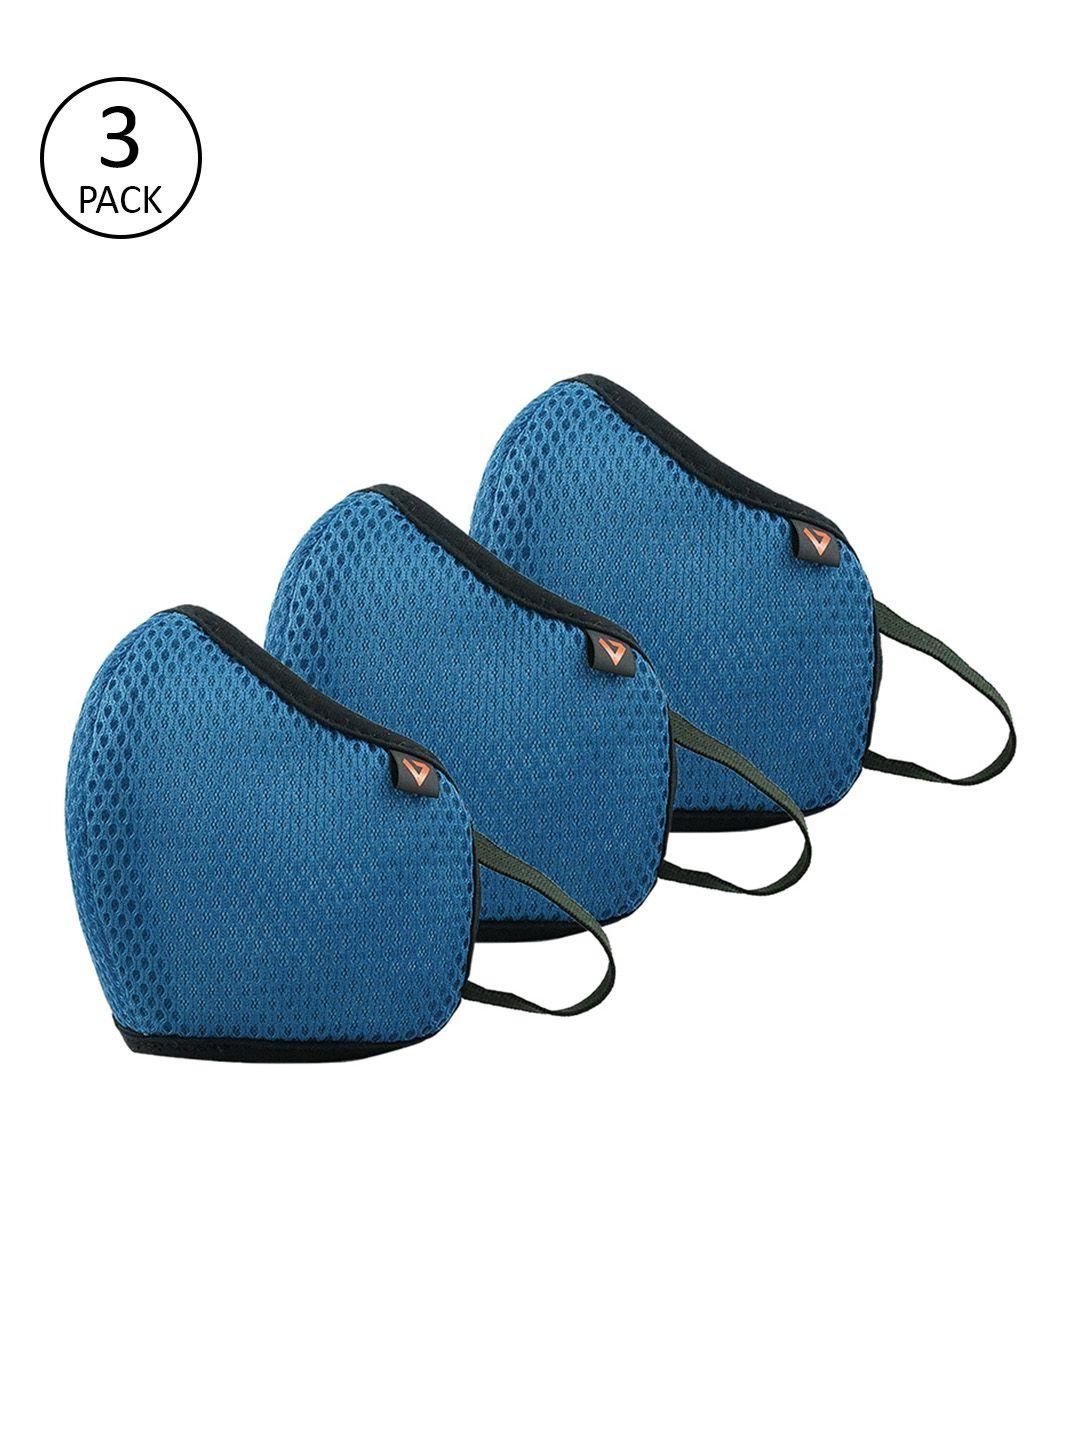 the-vertical-unisex-pack-of-3-pcs-blue-reusable-5-ply-protective-outdoor-masks